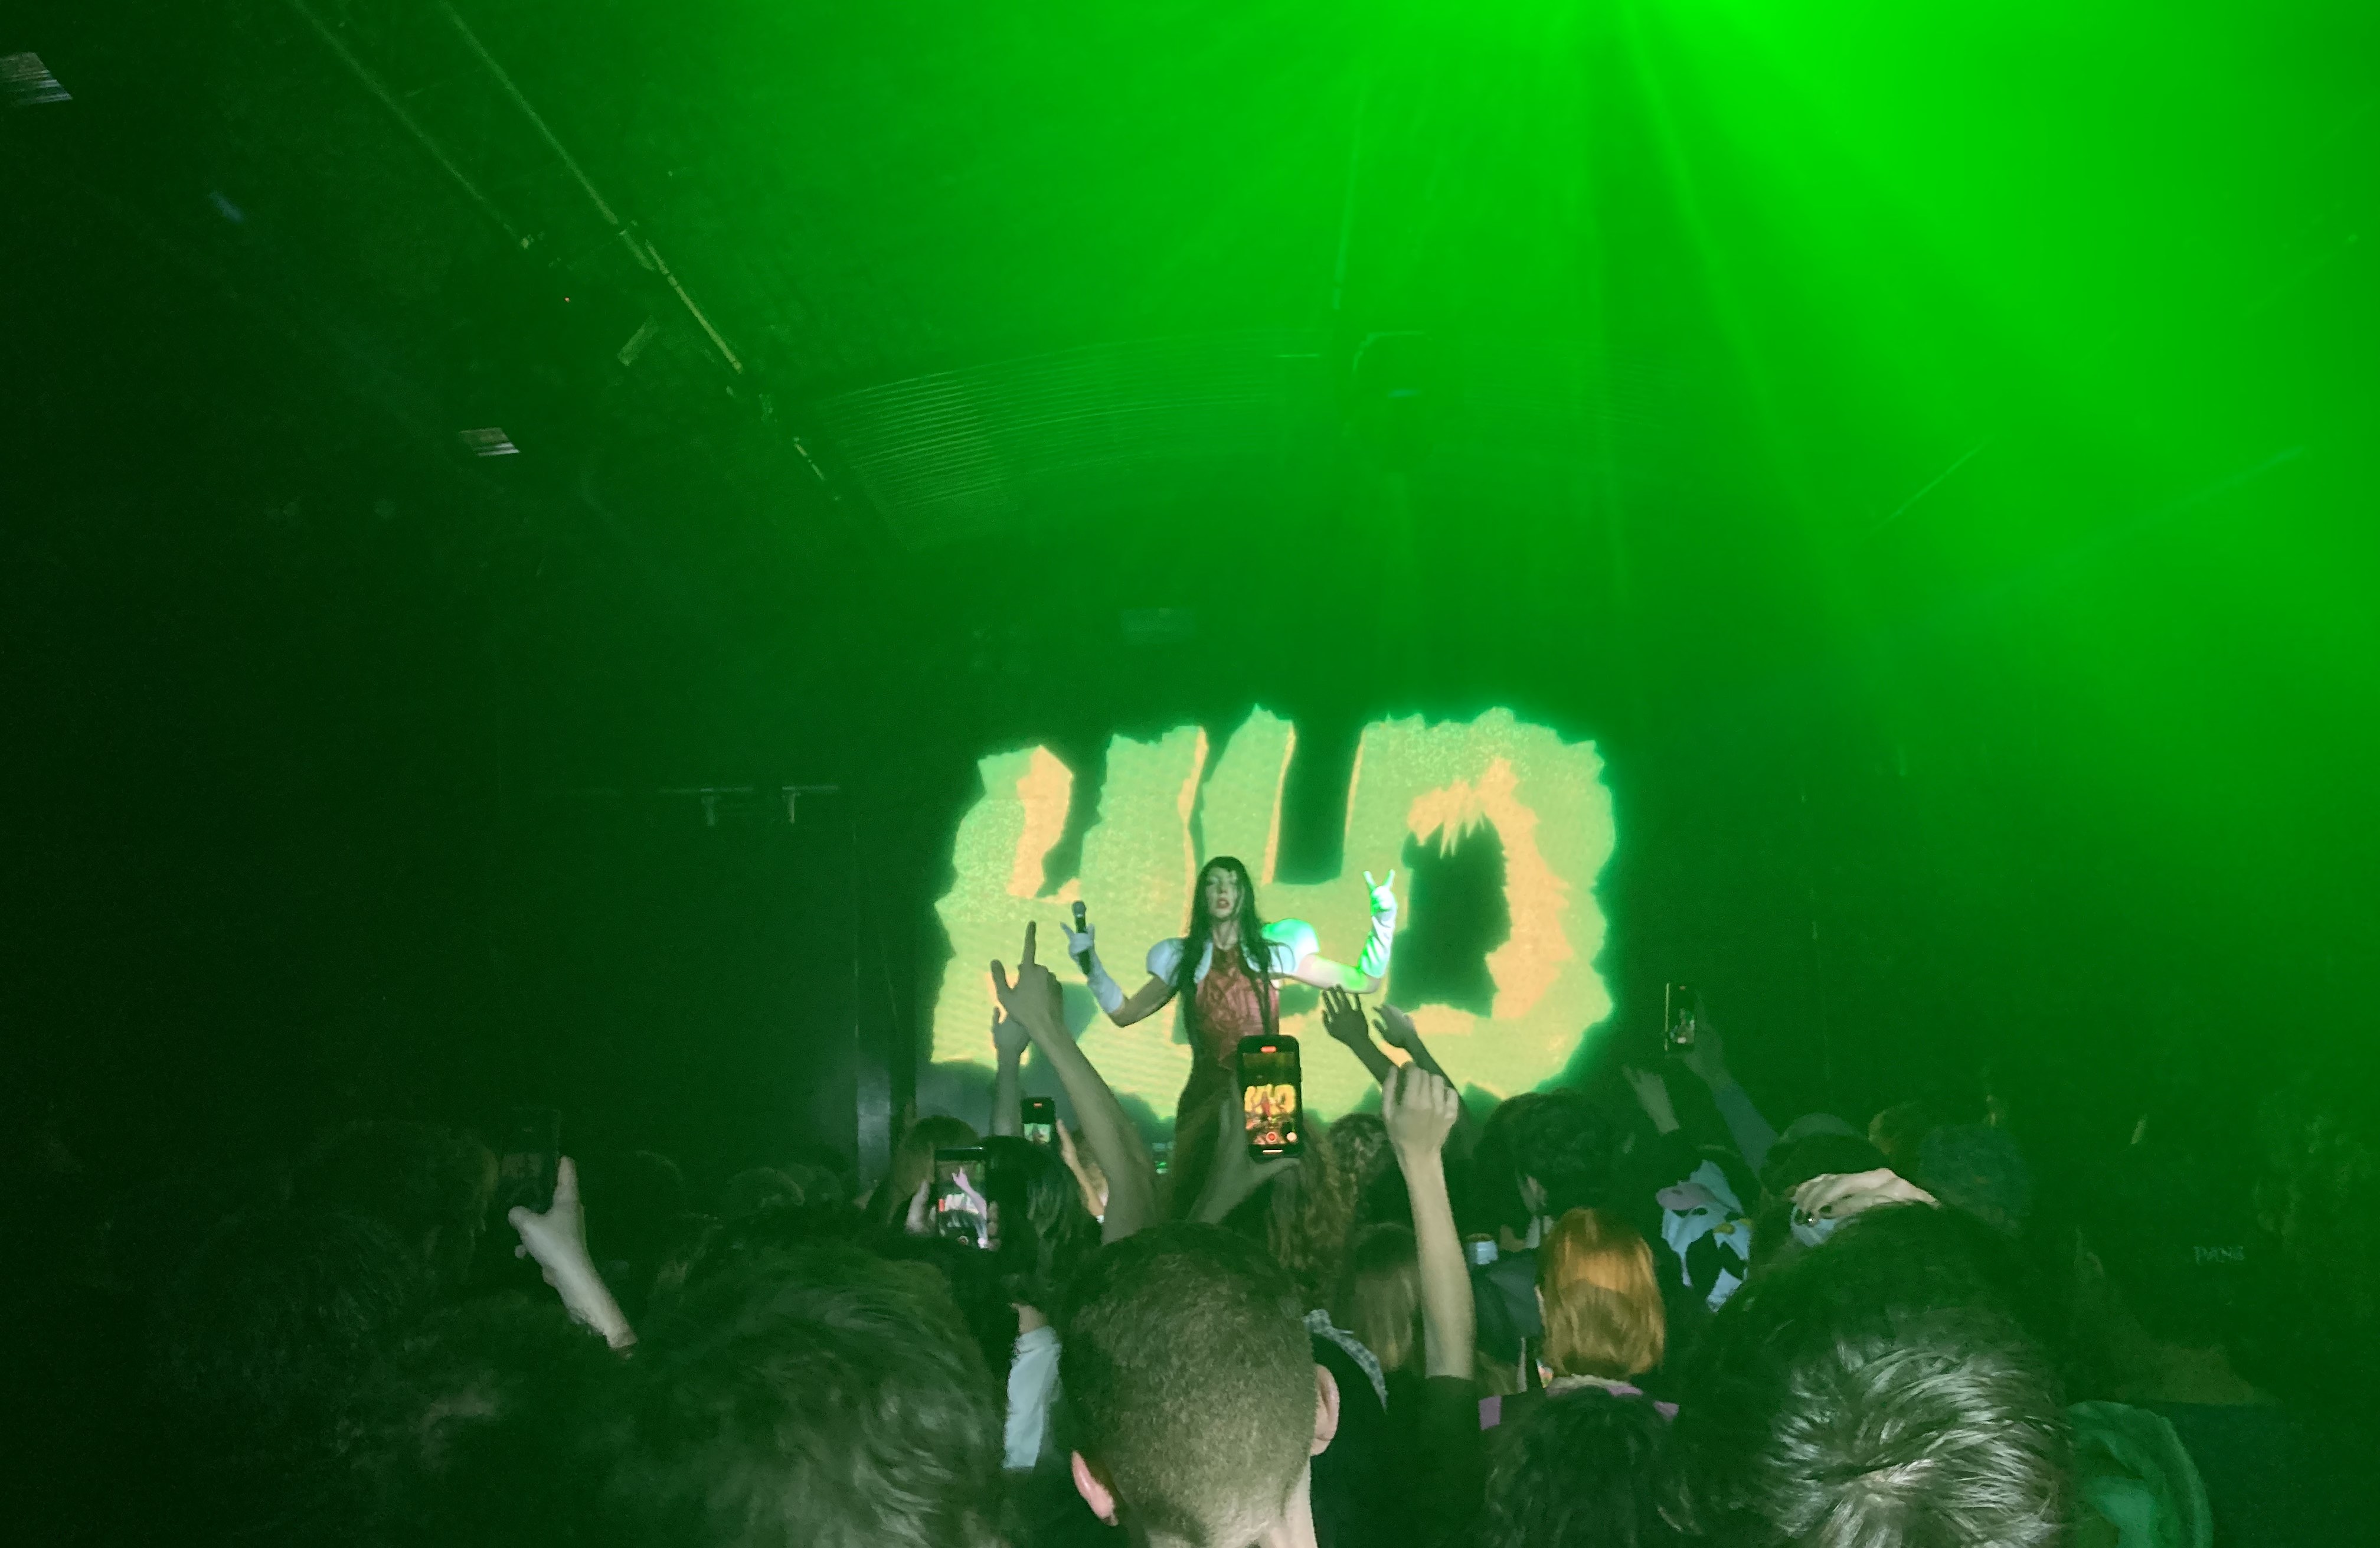 Hyd steals the show at PC Music’s Pitchfork Festival London takeover